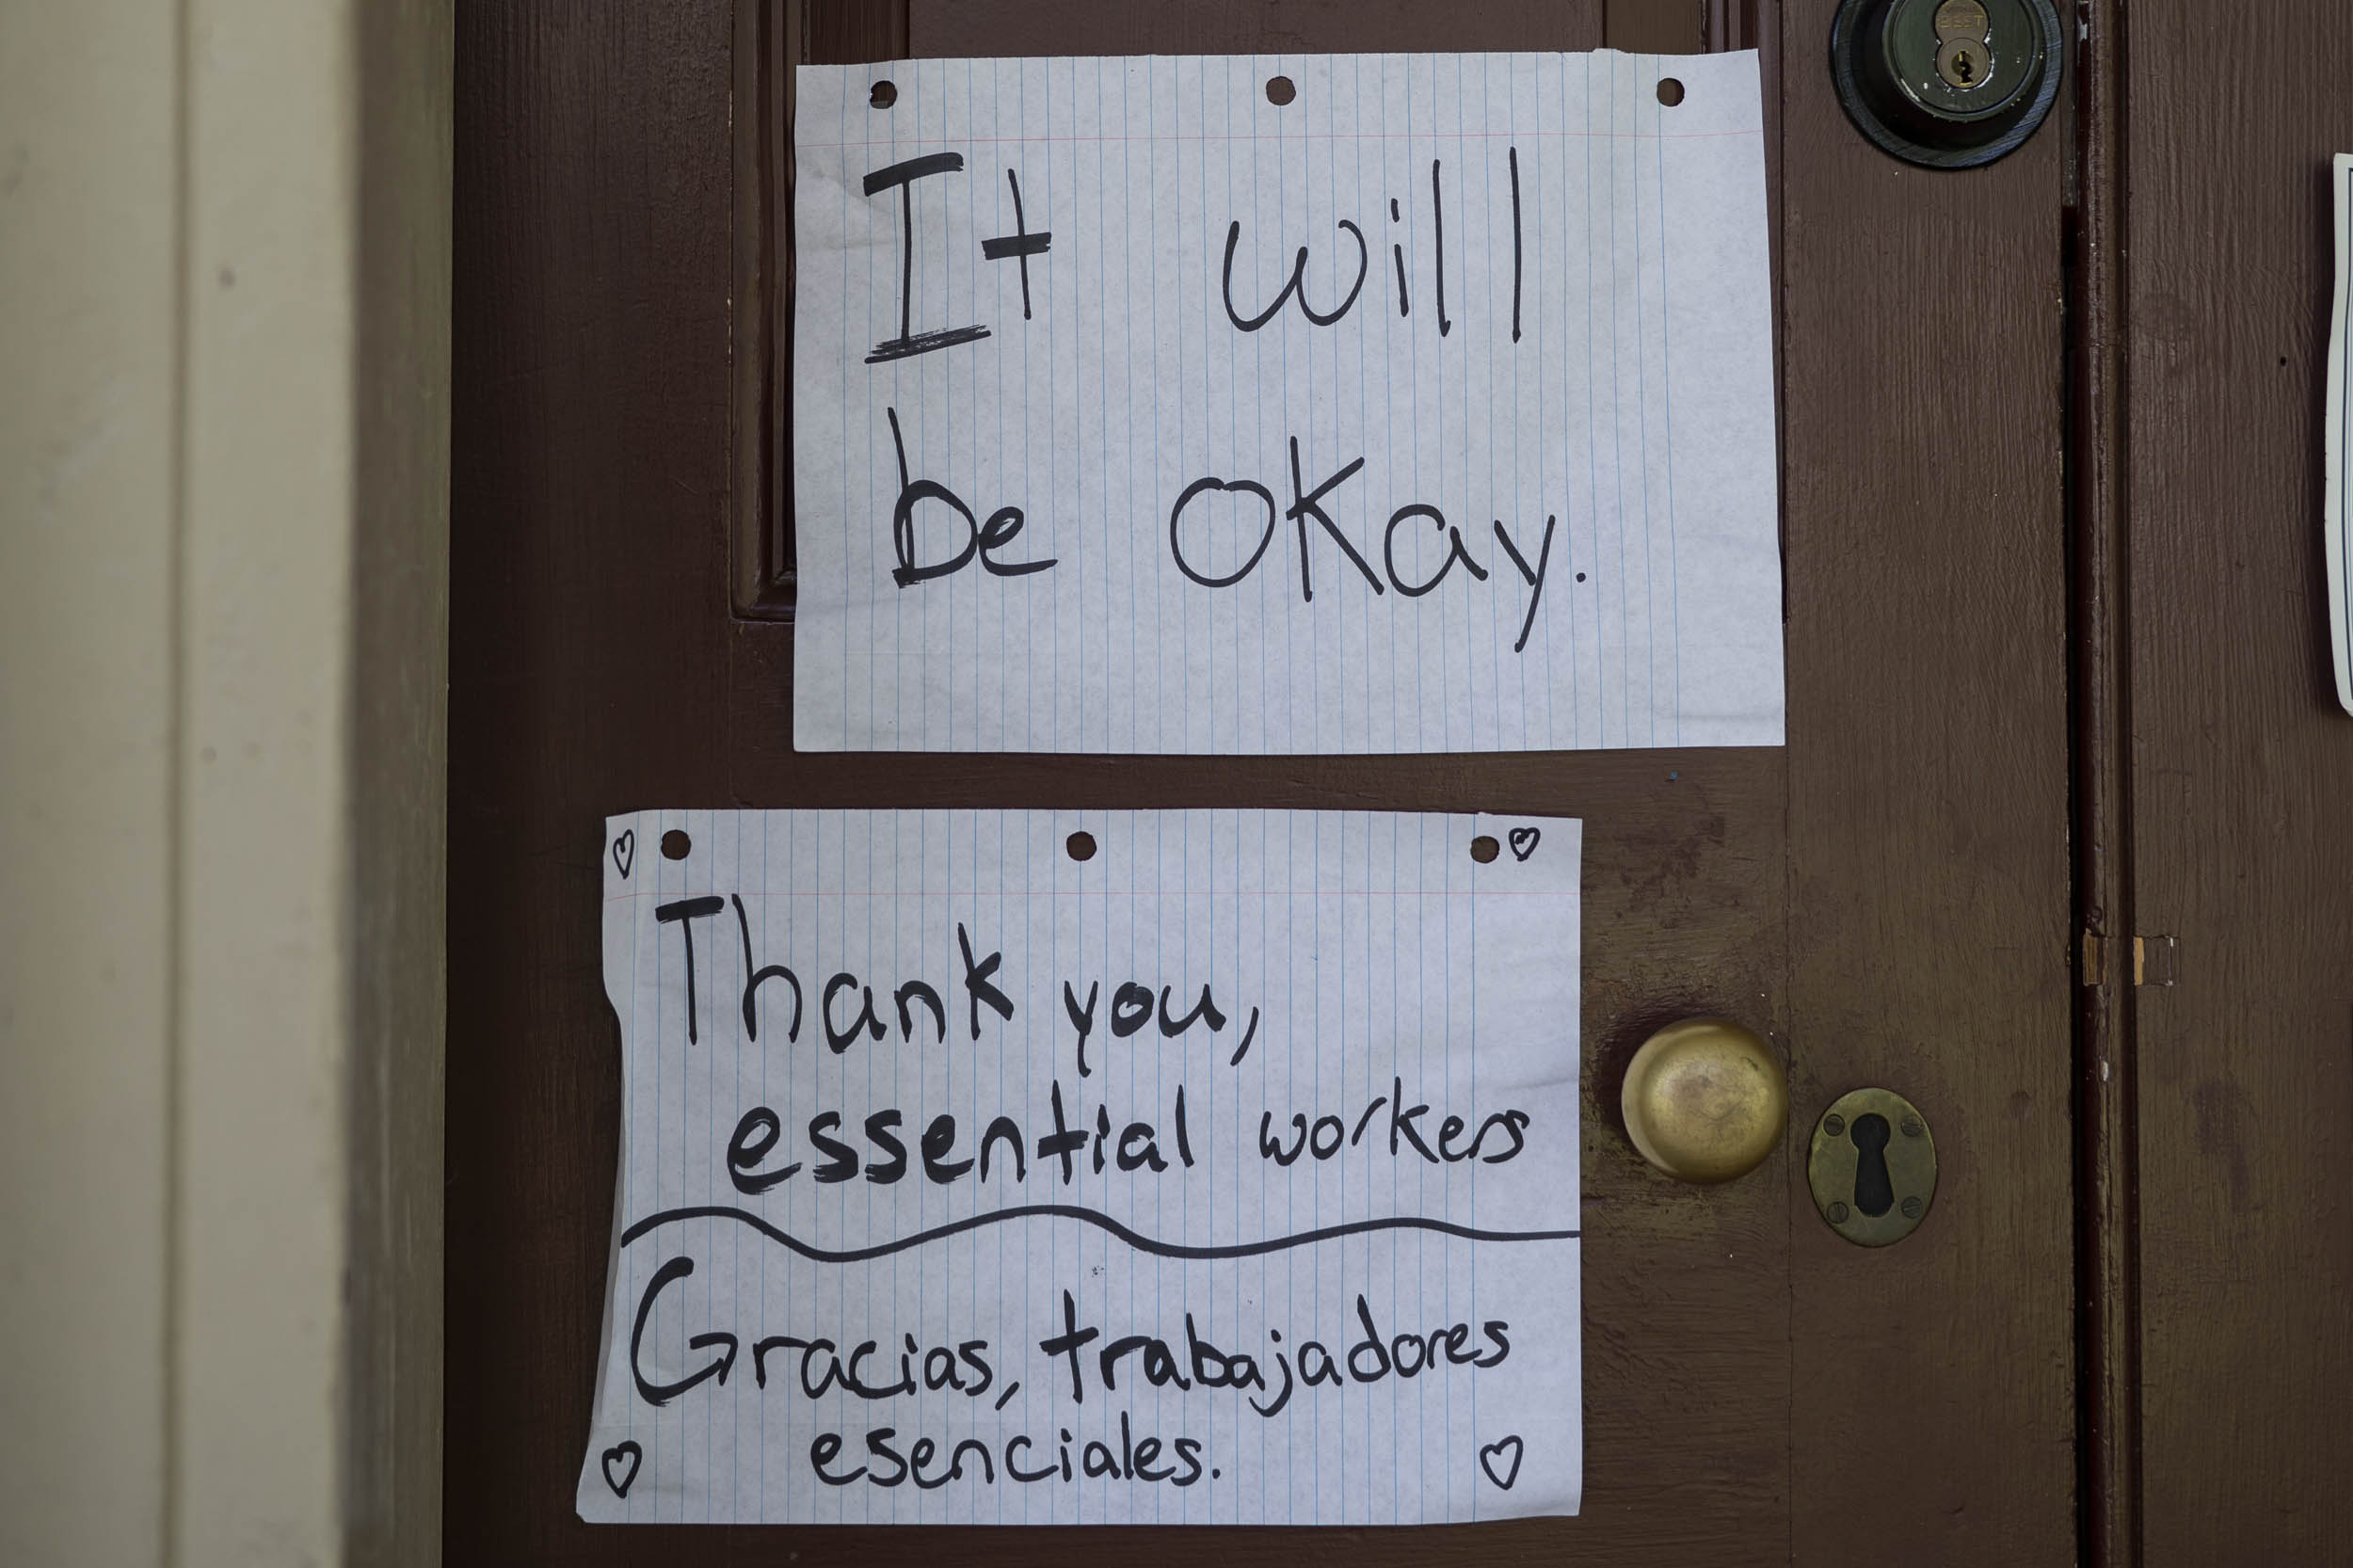 signs on looseleaf paper attached to a brown door that read: It will be okay. thank you, essential workers, Gracias, trabajadores esenciales